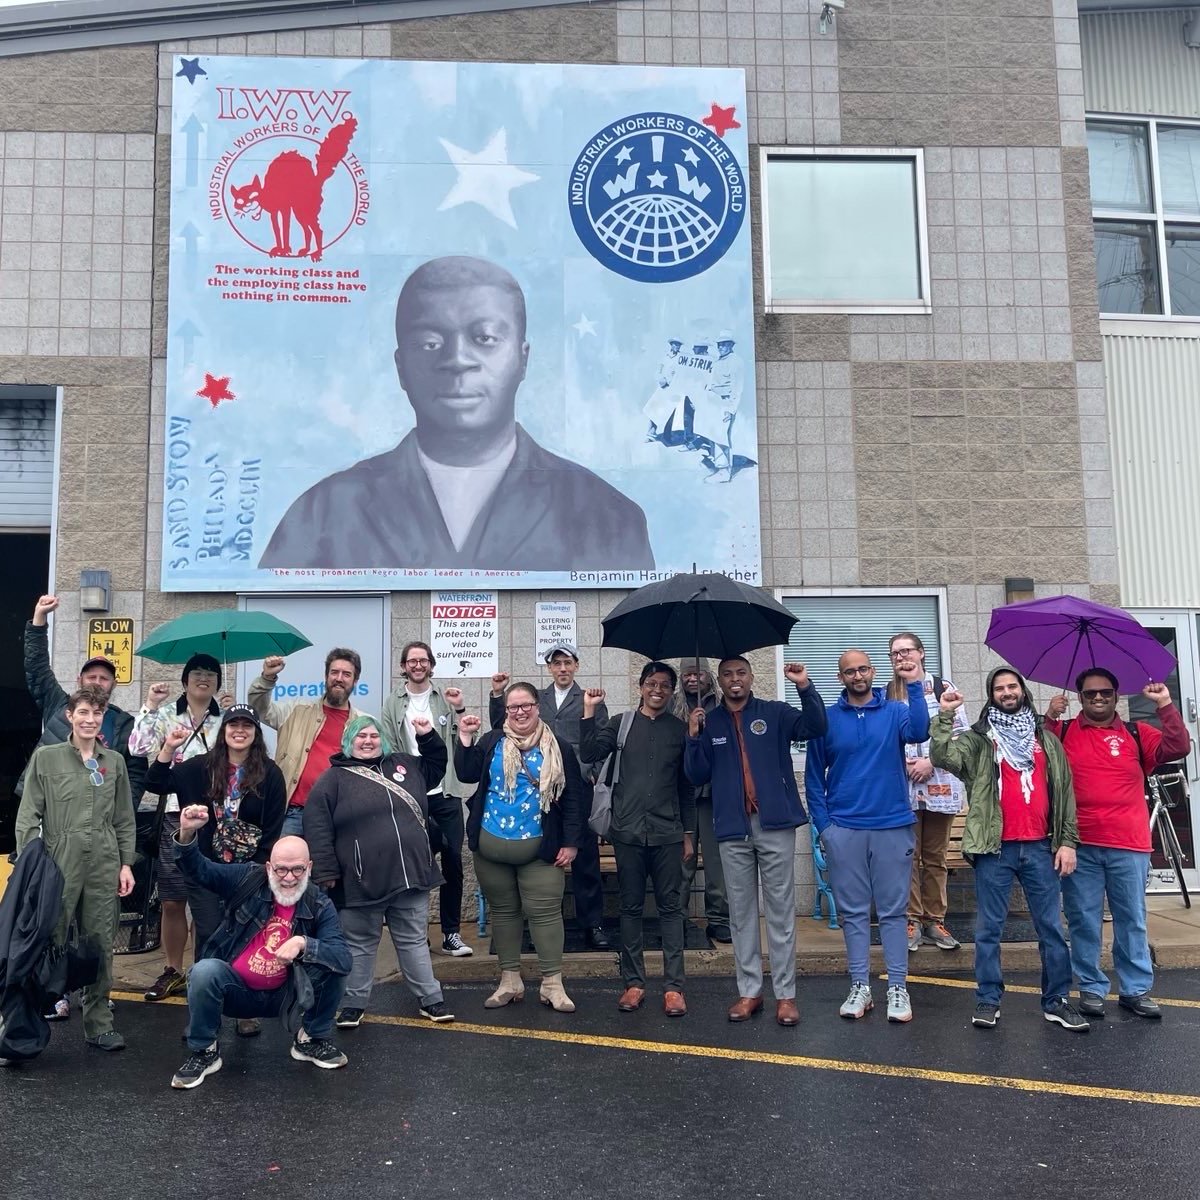 Grateful to @PhillyDSA, @muralarts, and @pinkett1 for bringing this powerful mural of Ben Fletcher to the Delaware River waterfront! His legacy is a testament to socialist and Black radical history, and to the unyielding strength of workers who refuse to be divided.